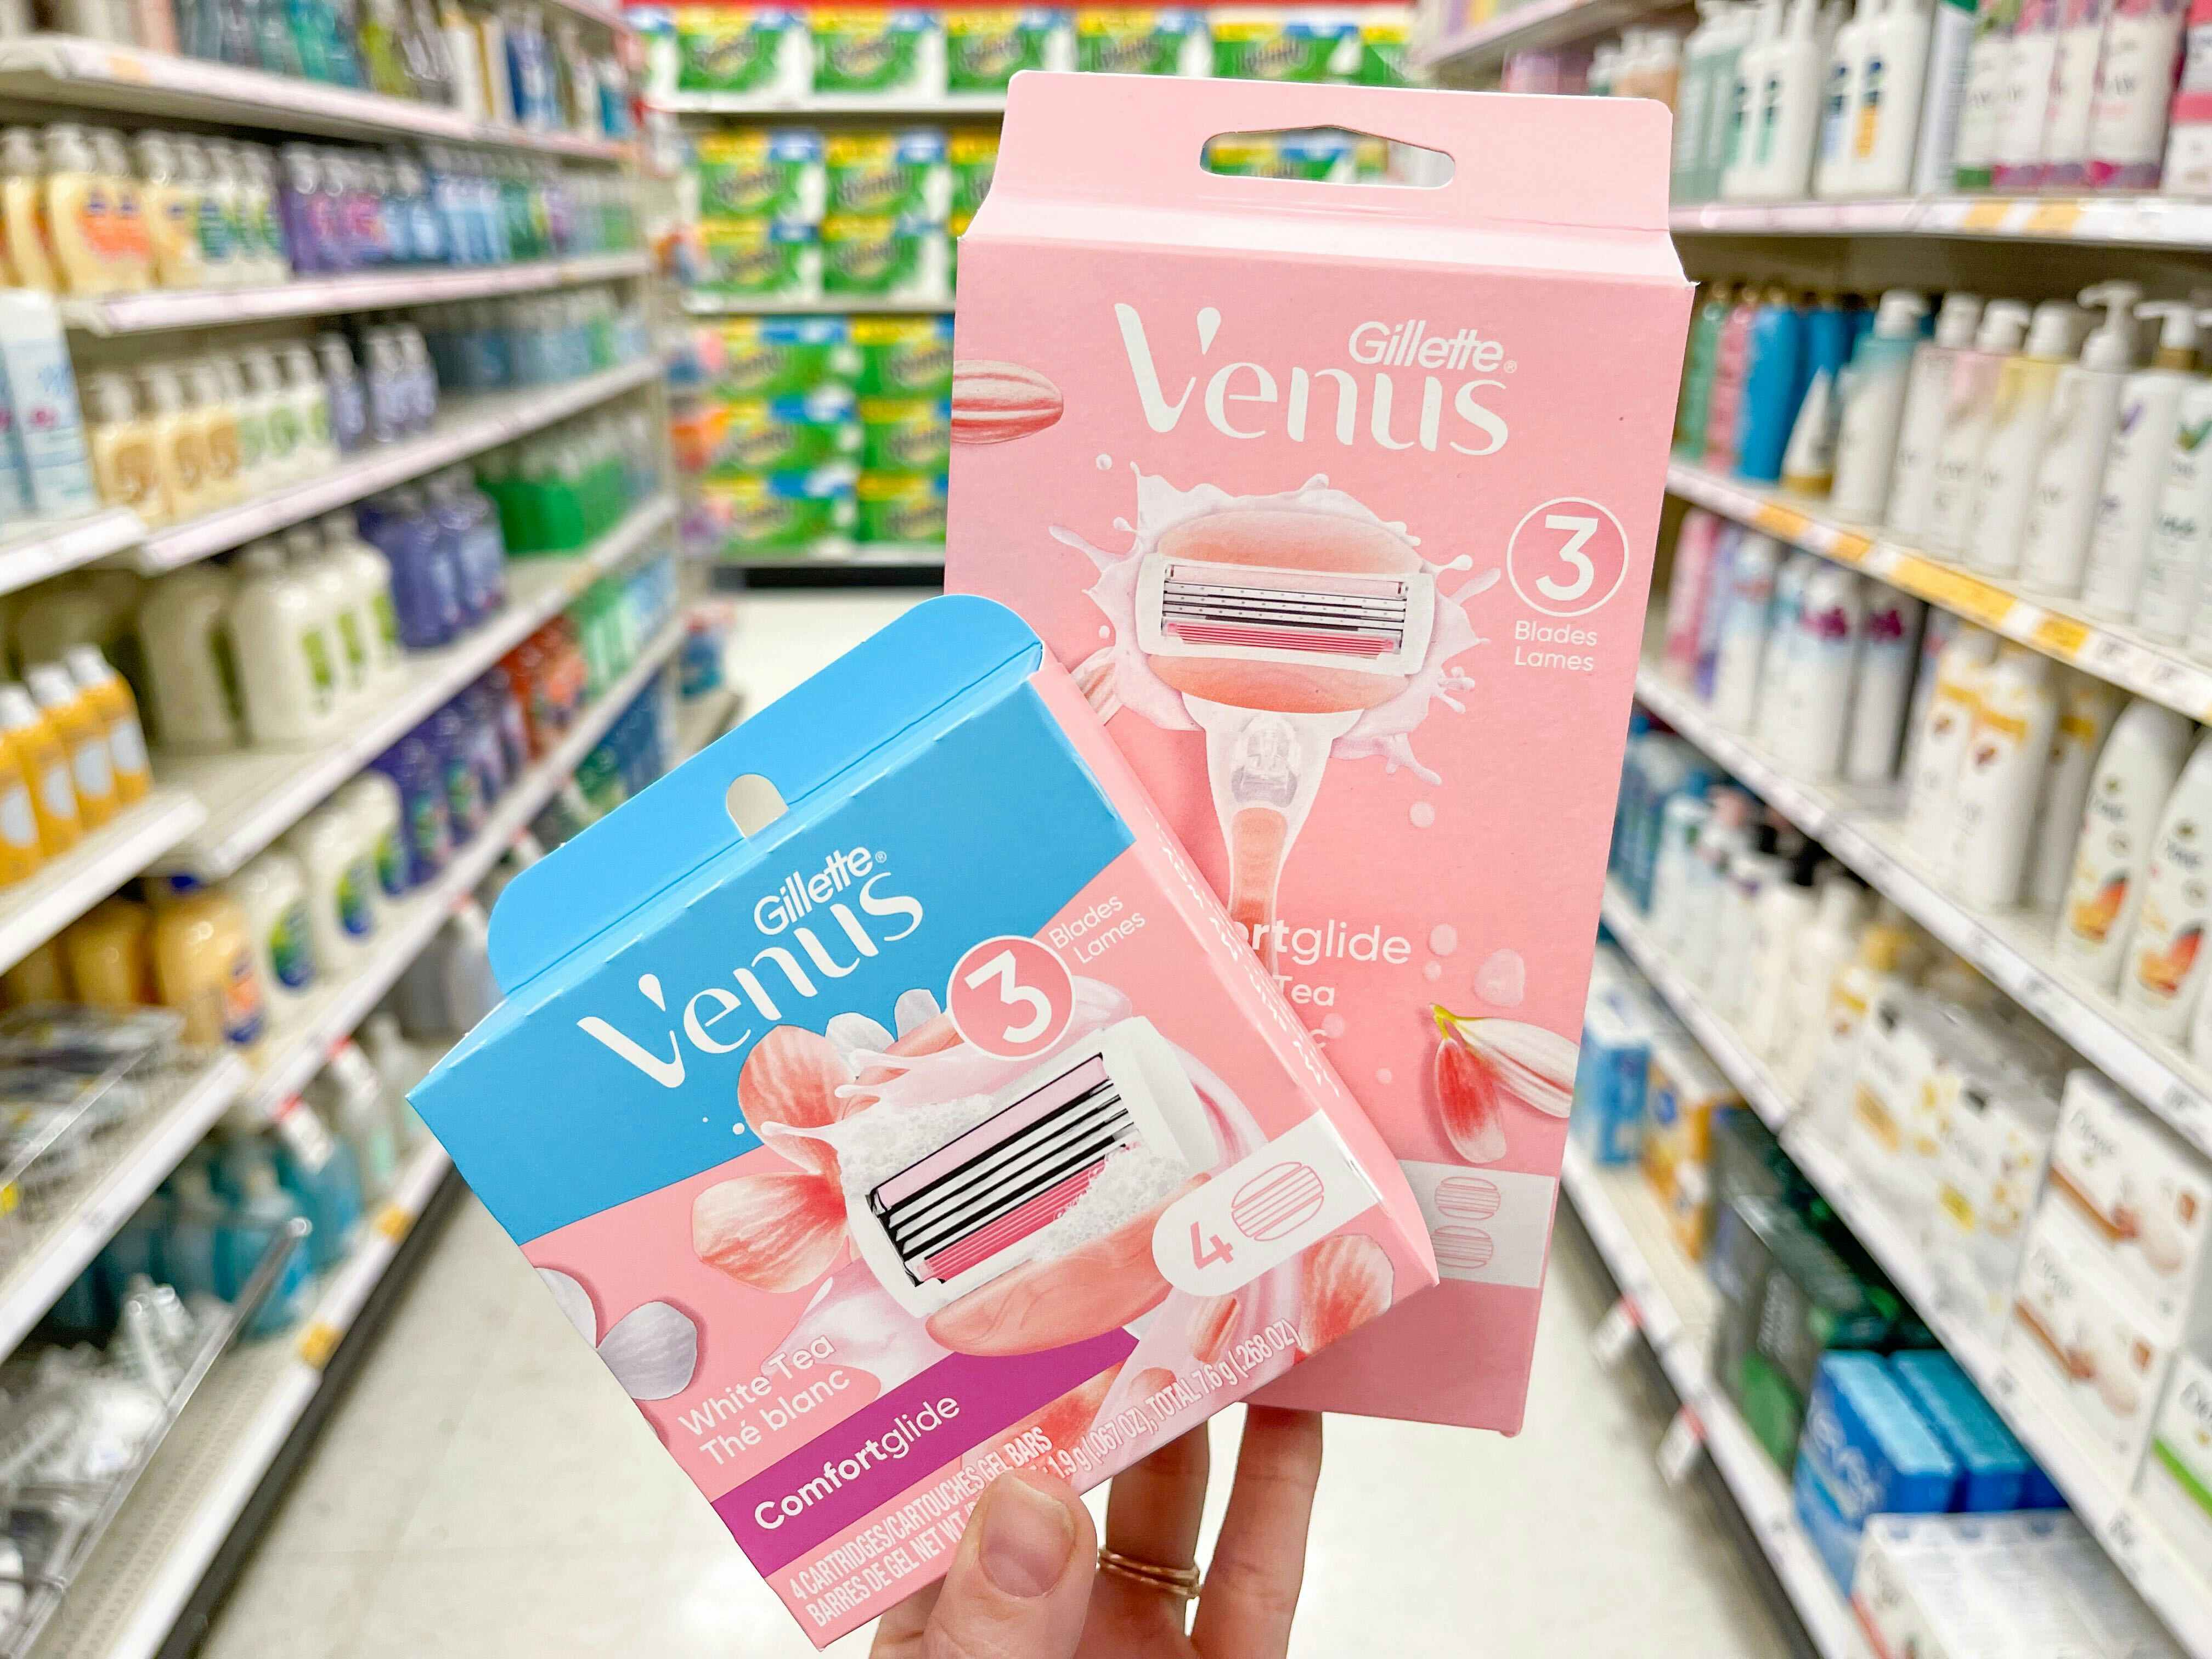 A Venus White Tea razor and a Venus refill pack held out by hand in front of a store aisle.